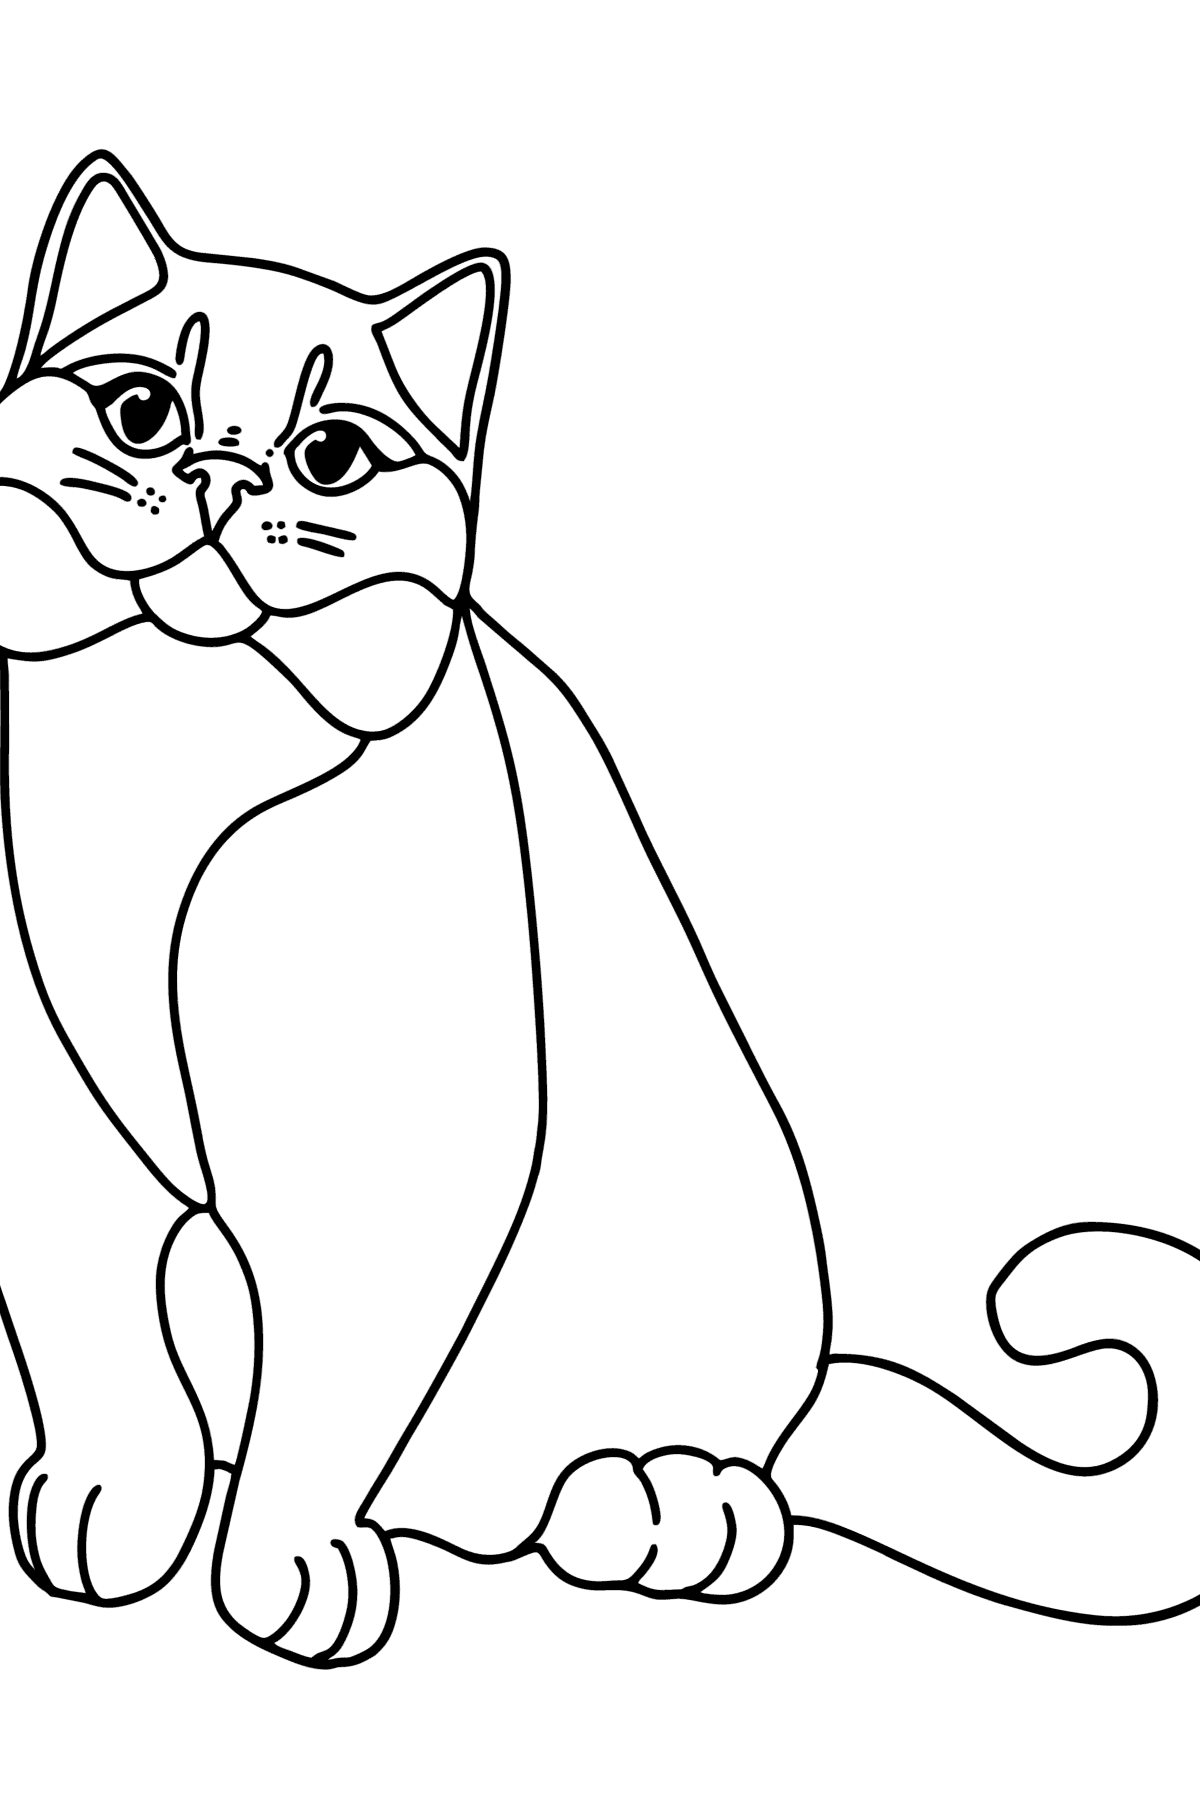 British Cat coloring page - Coloring Pages for Kids